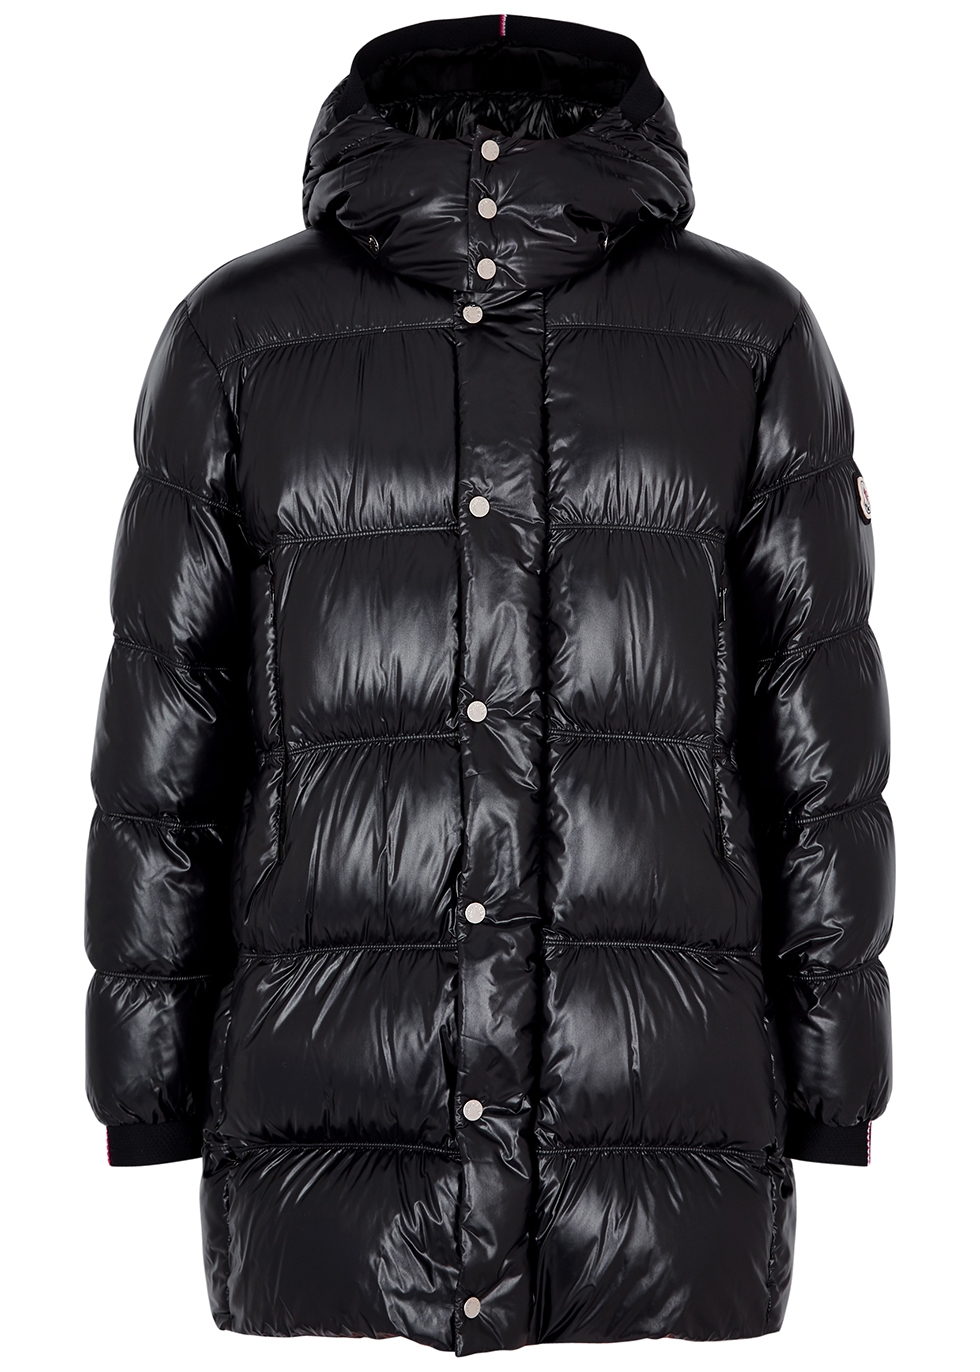 Moncler Pablof quilted shell jacket - Harvey Nichols